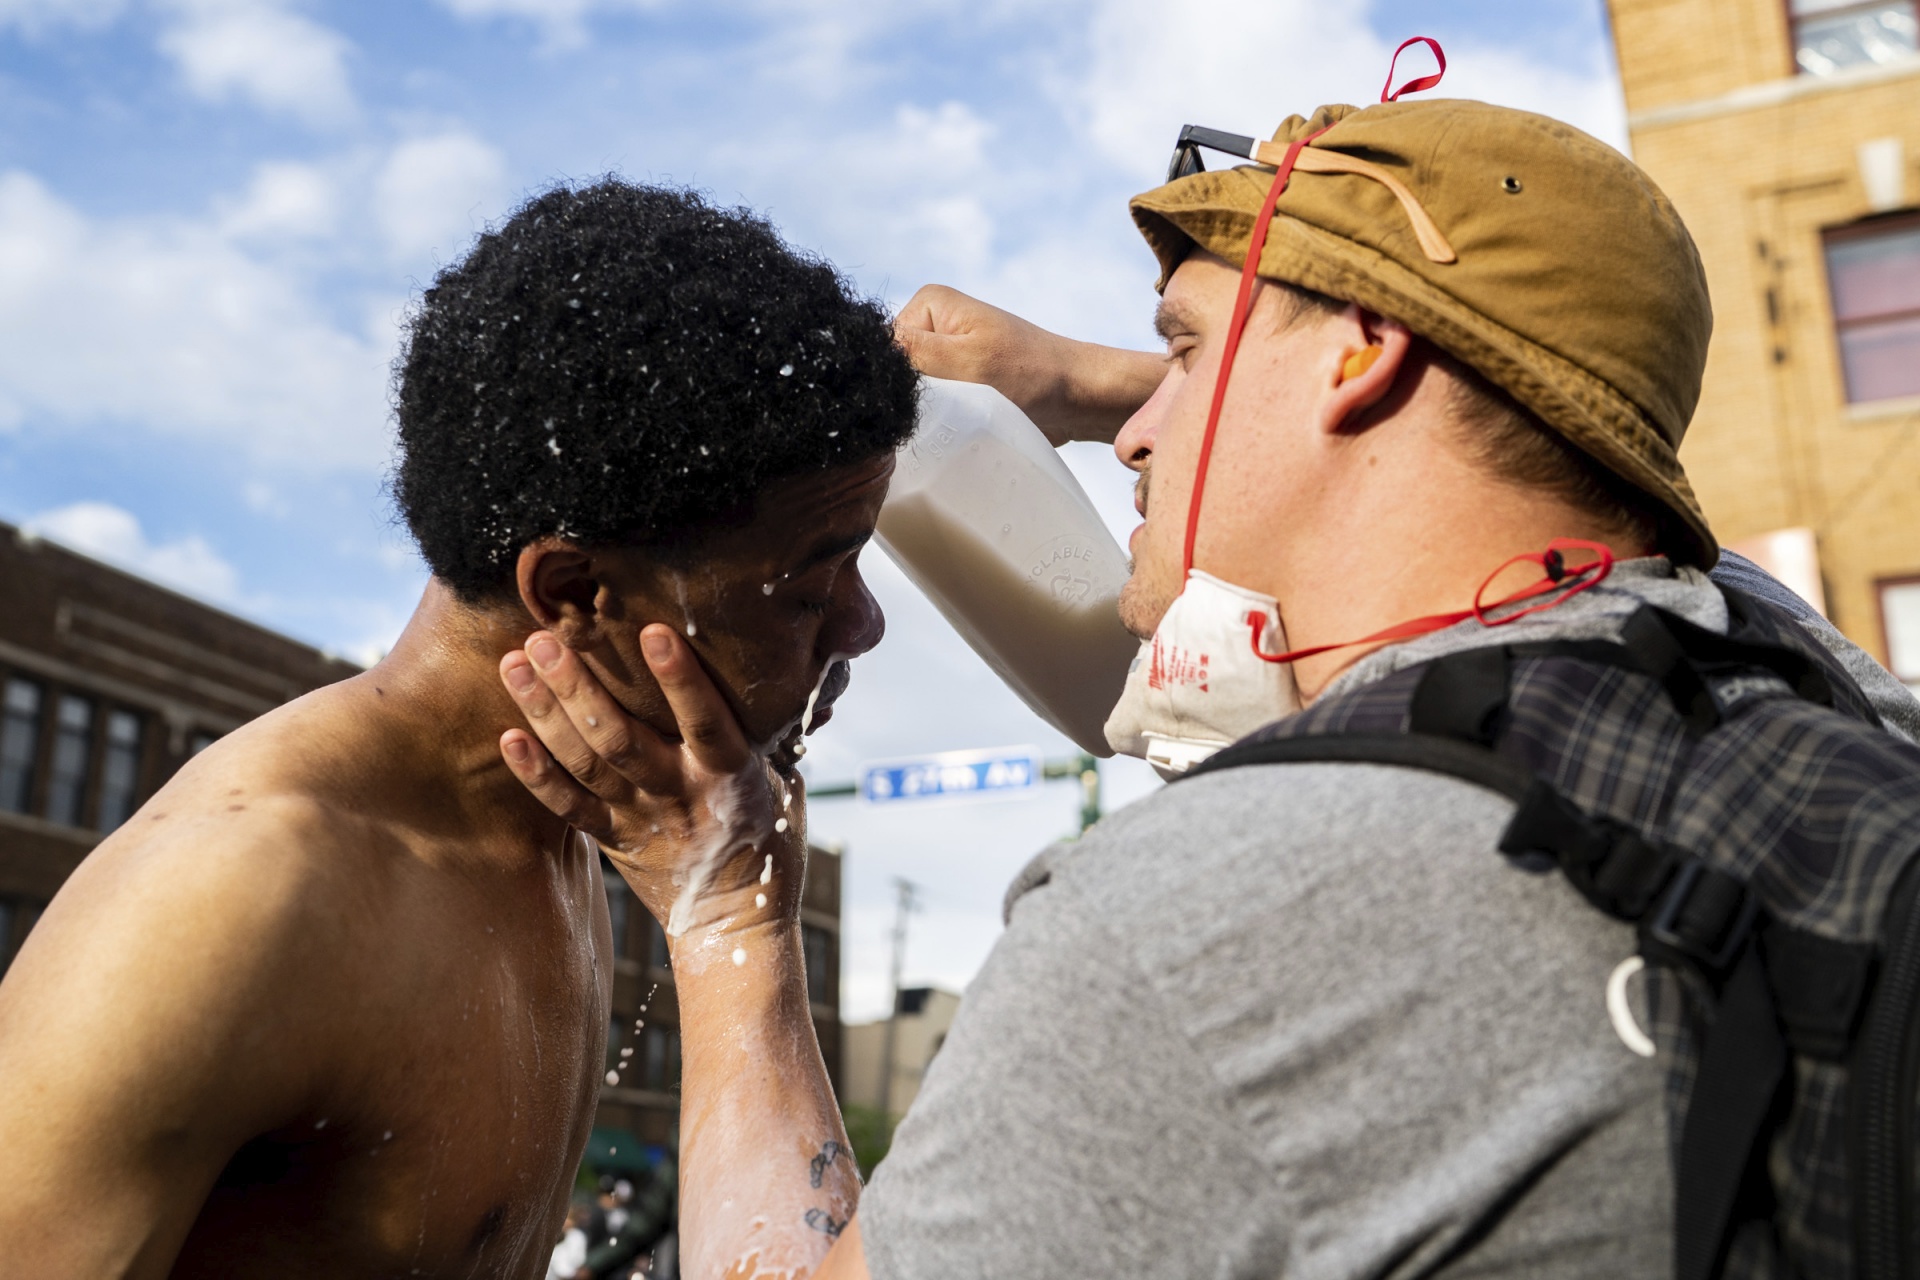 A man pours milk onto the face and eyes of another